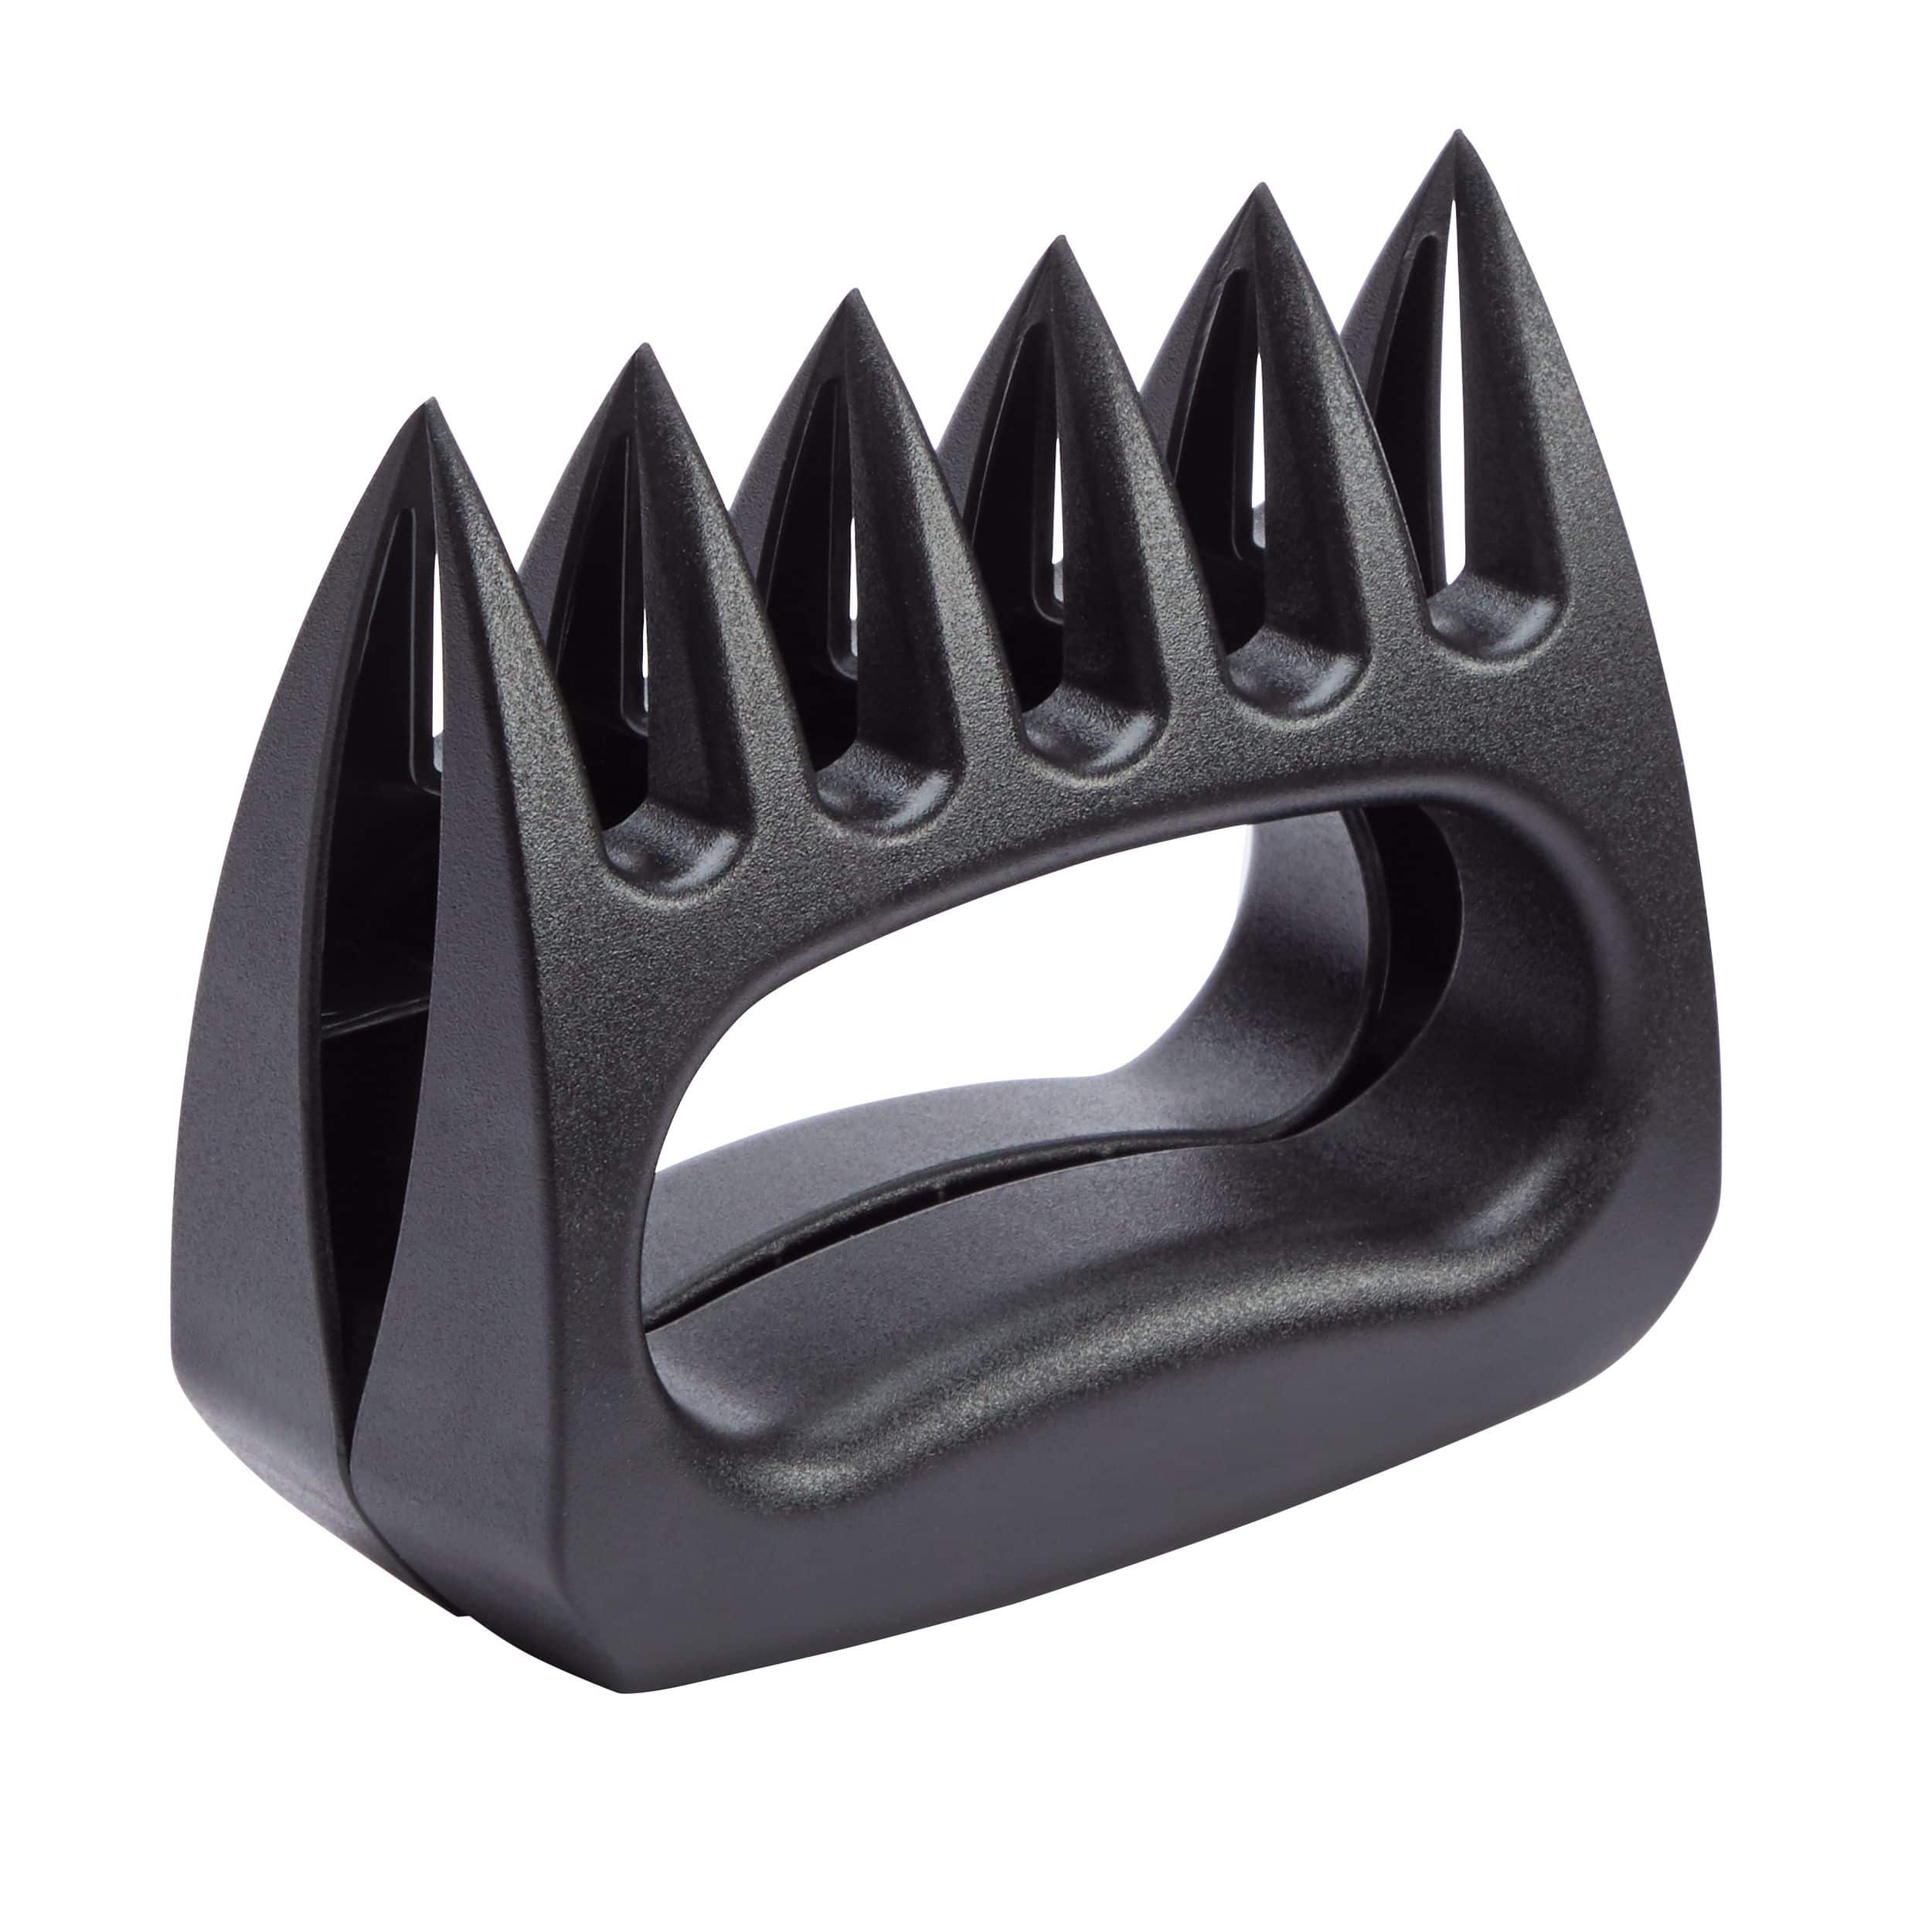 https://media-www.canadiantire.ca/product/seasonal-gardening/backyard-living/outdoor-cooking-accessories/0852321/master-chef-plastic-meat-claws-6937b859-5658-4931-aafc-727784c7e22f-jpgrendition.jpg